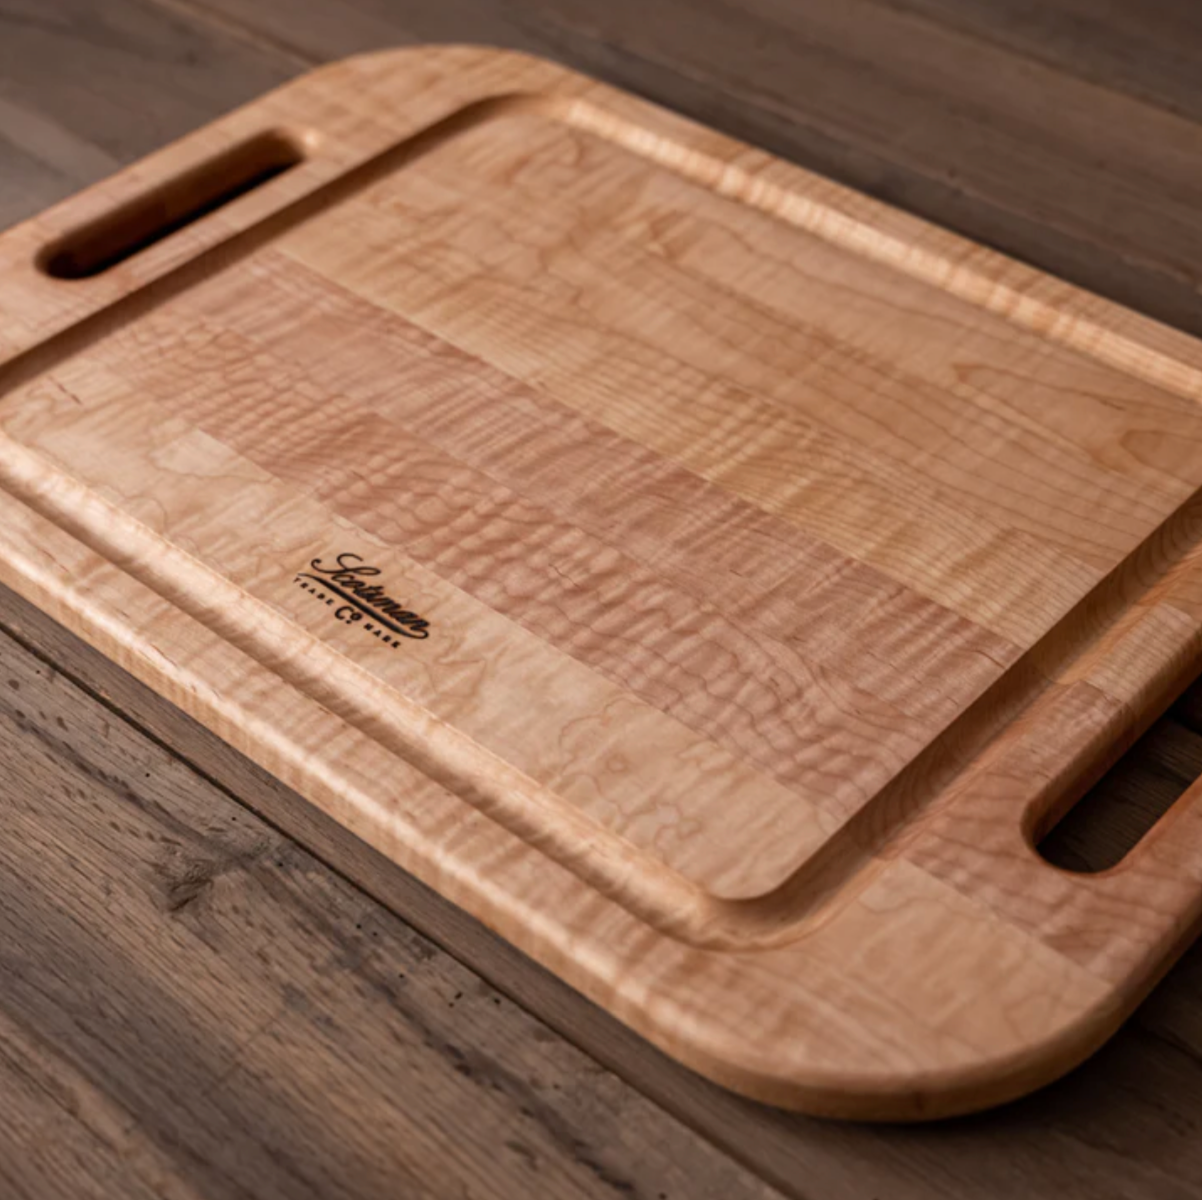 Curly Cherry Charcuterie Board with Industrial Handles